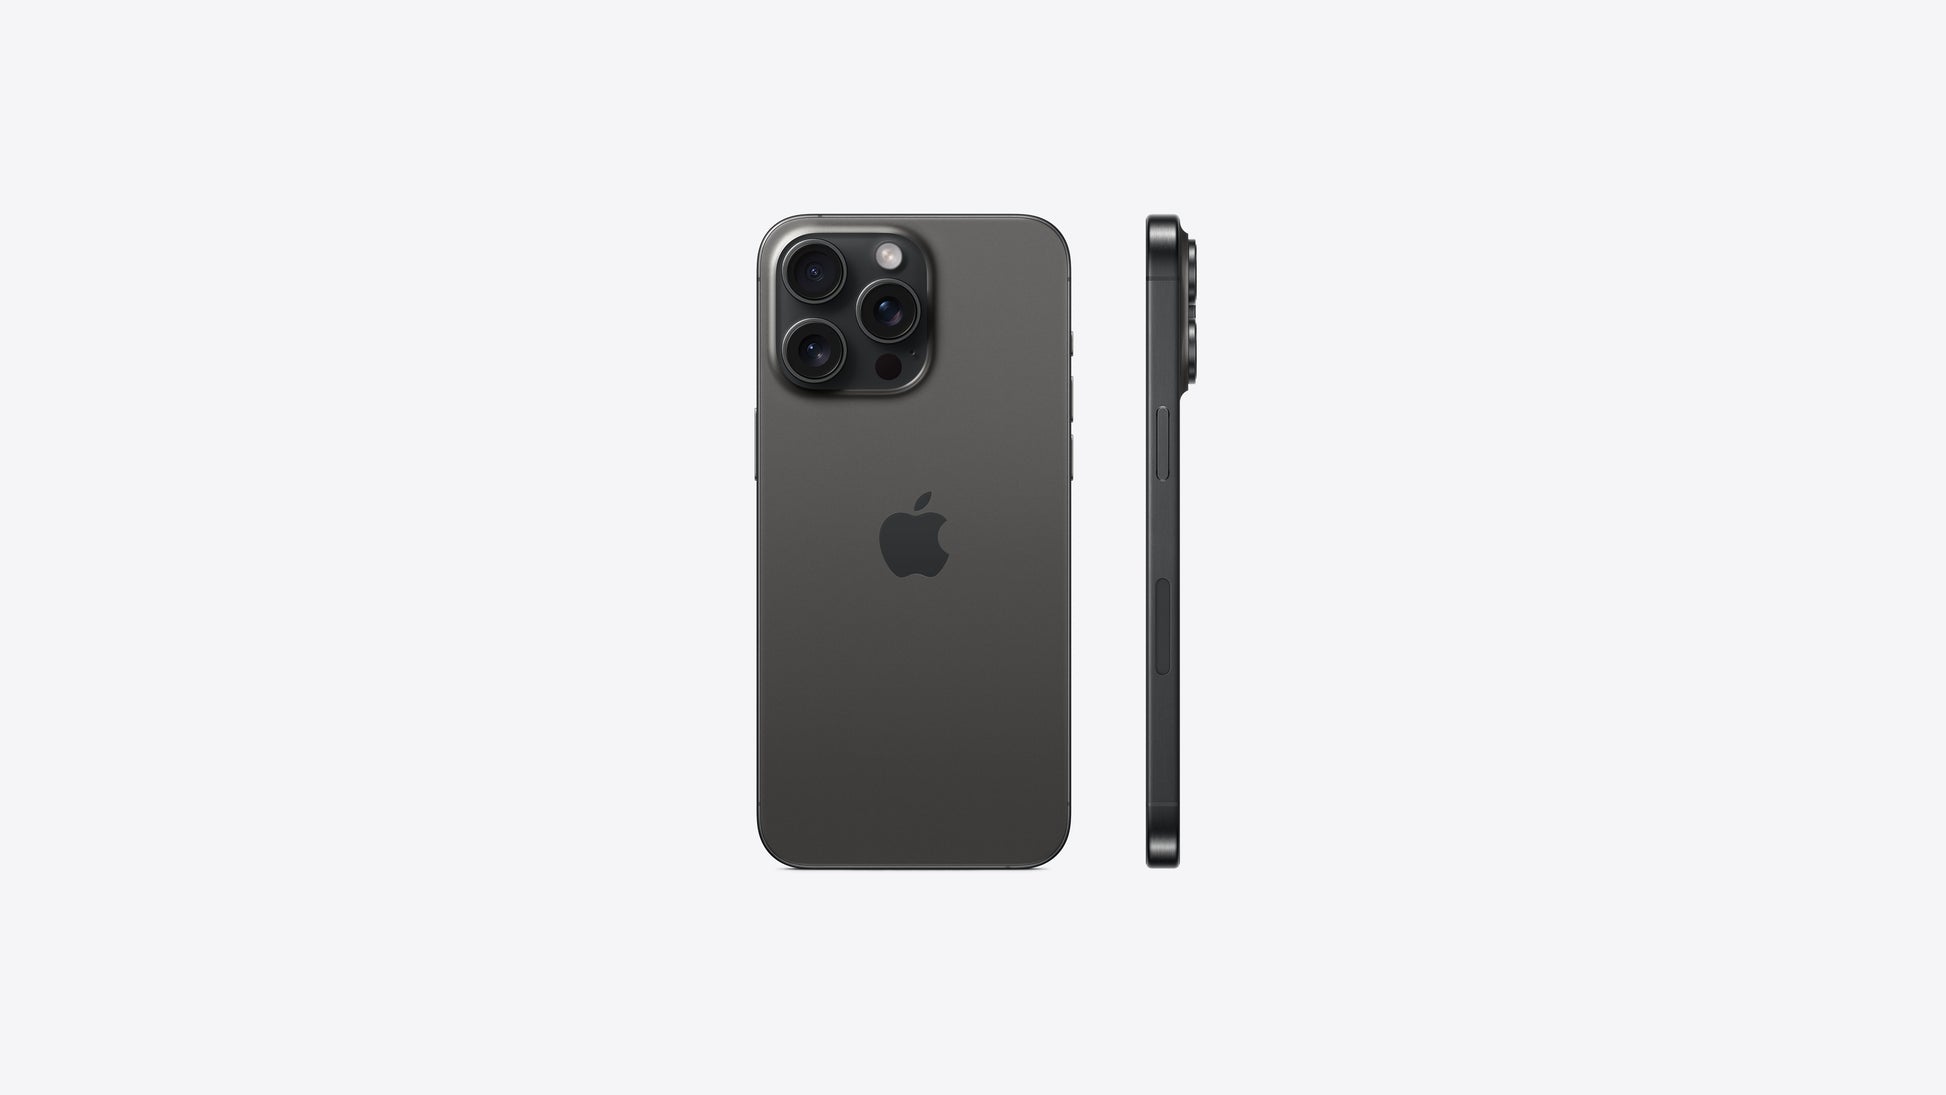 IPhone 15 pro max, 6.7-inch display, Color - Black Titanium, 256GB, in the Box - iPhone 15 Pro Max and USB-C Charge Cable. Guarantee for 2 years.